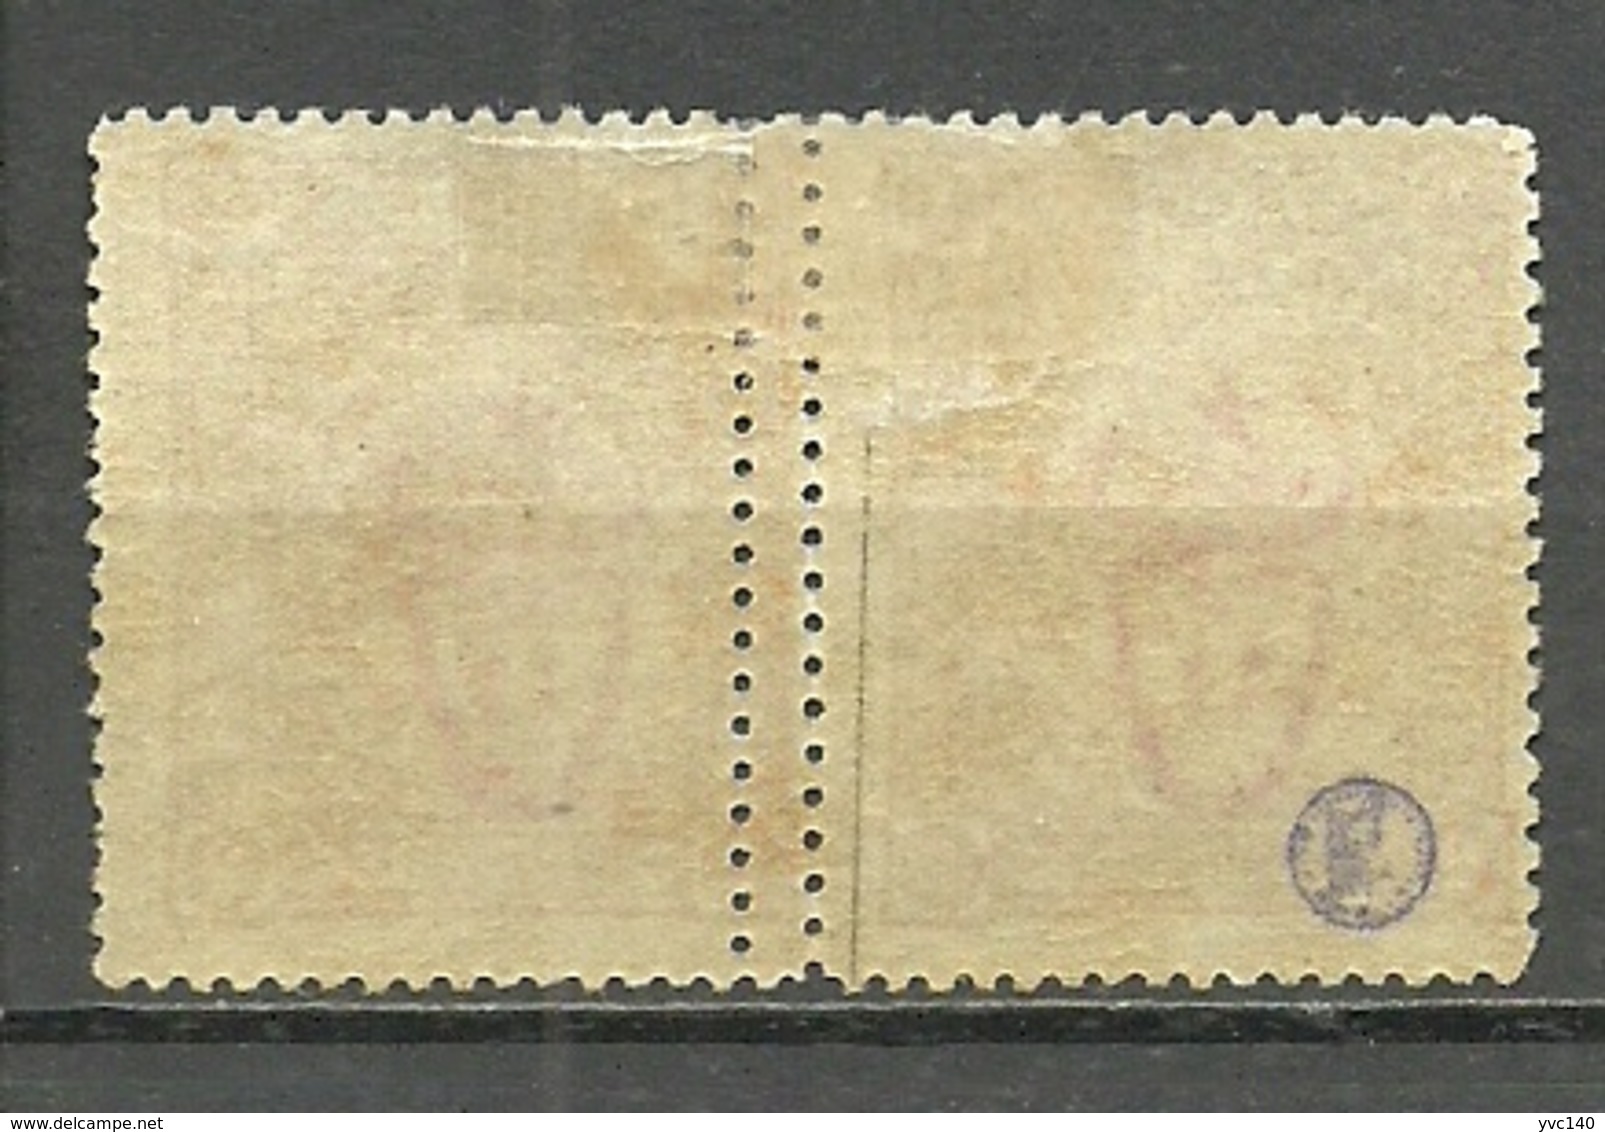 Turkey; 1917 Overprinted War Issue Stamp 2 K. ERROR "Double Perf." (Signed) - Unused Stamps